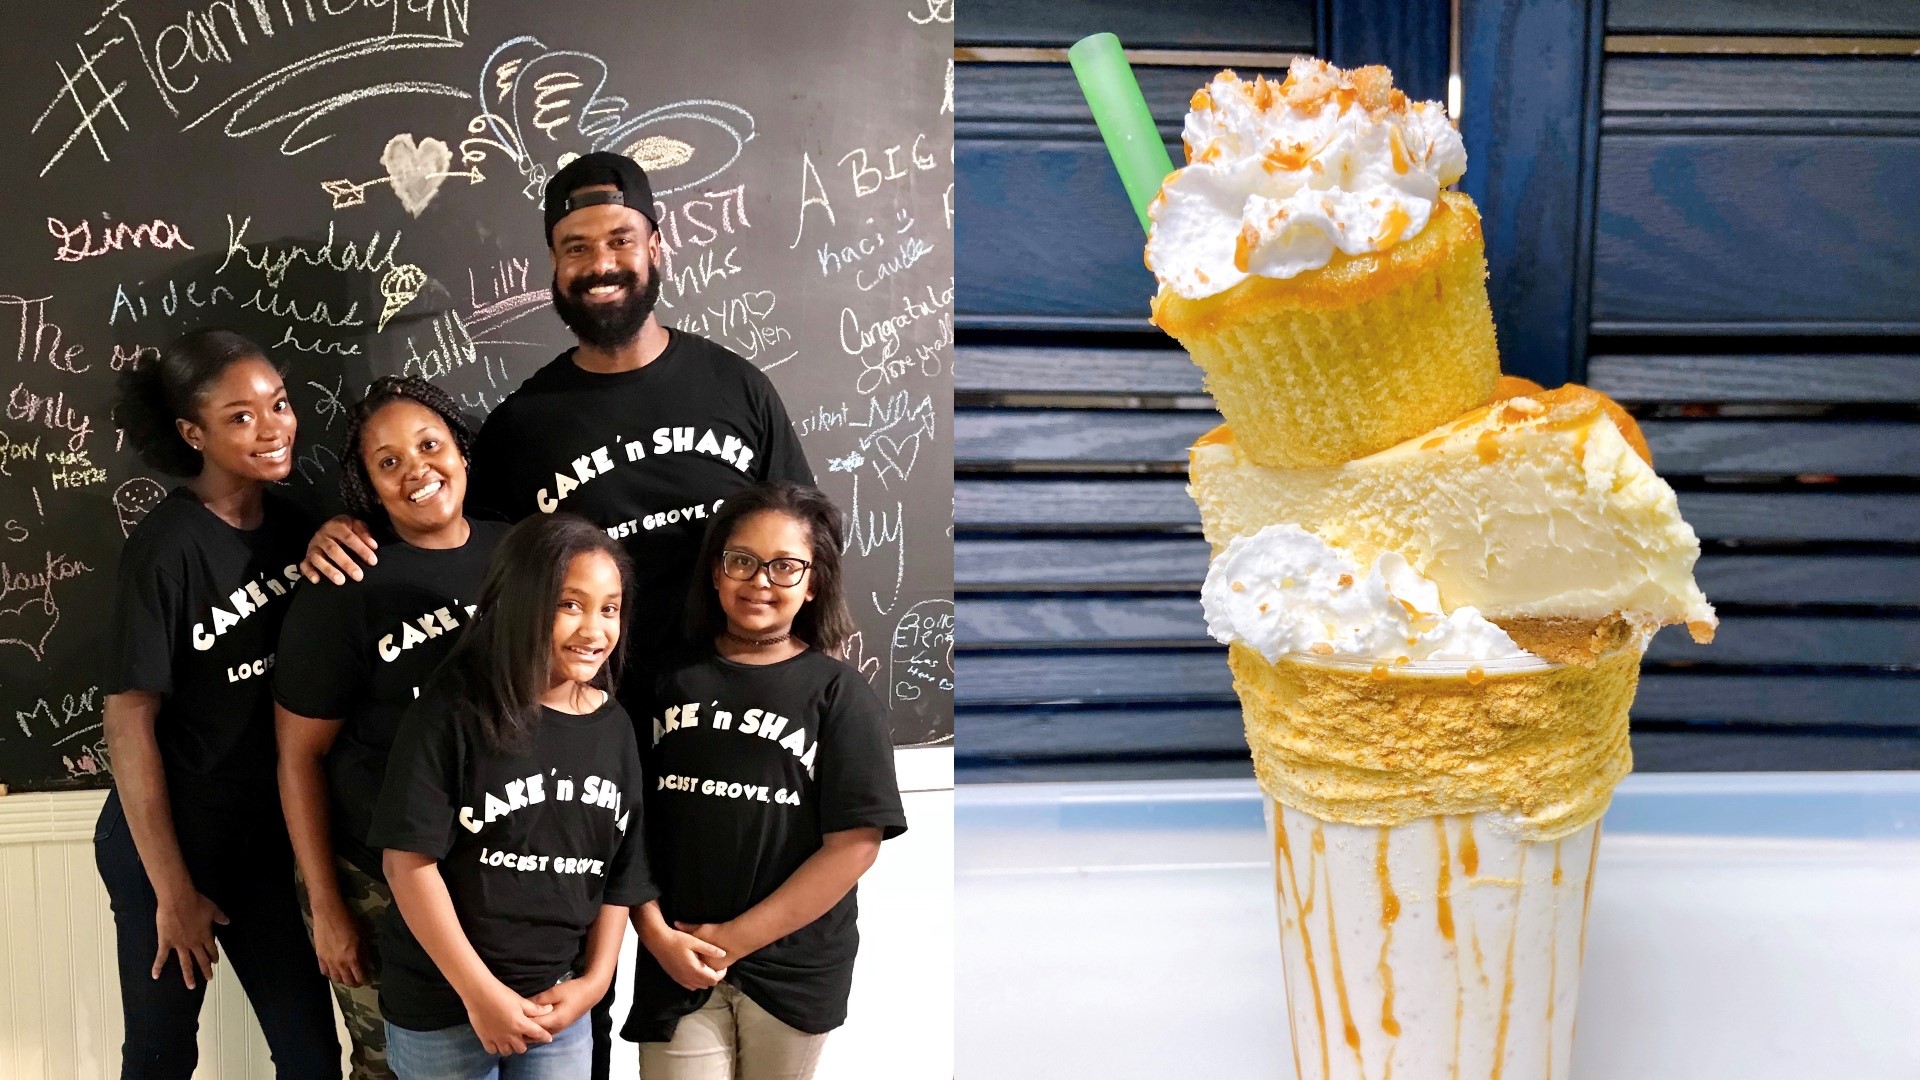 Cake n' Shake is a family-owned and operated chain known for its milkshakes that are topped with things like cupcakes and cheesecake slices